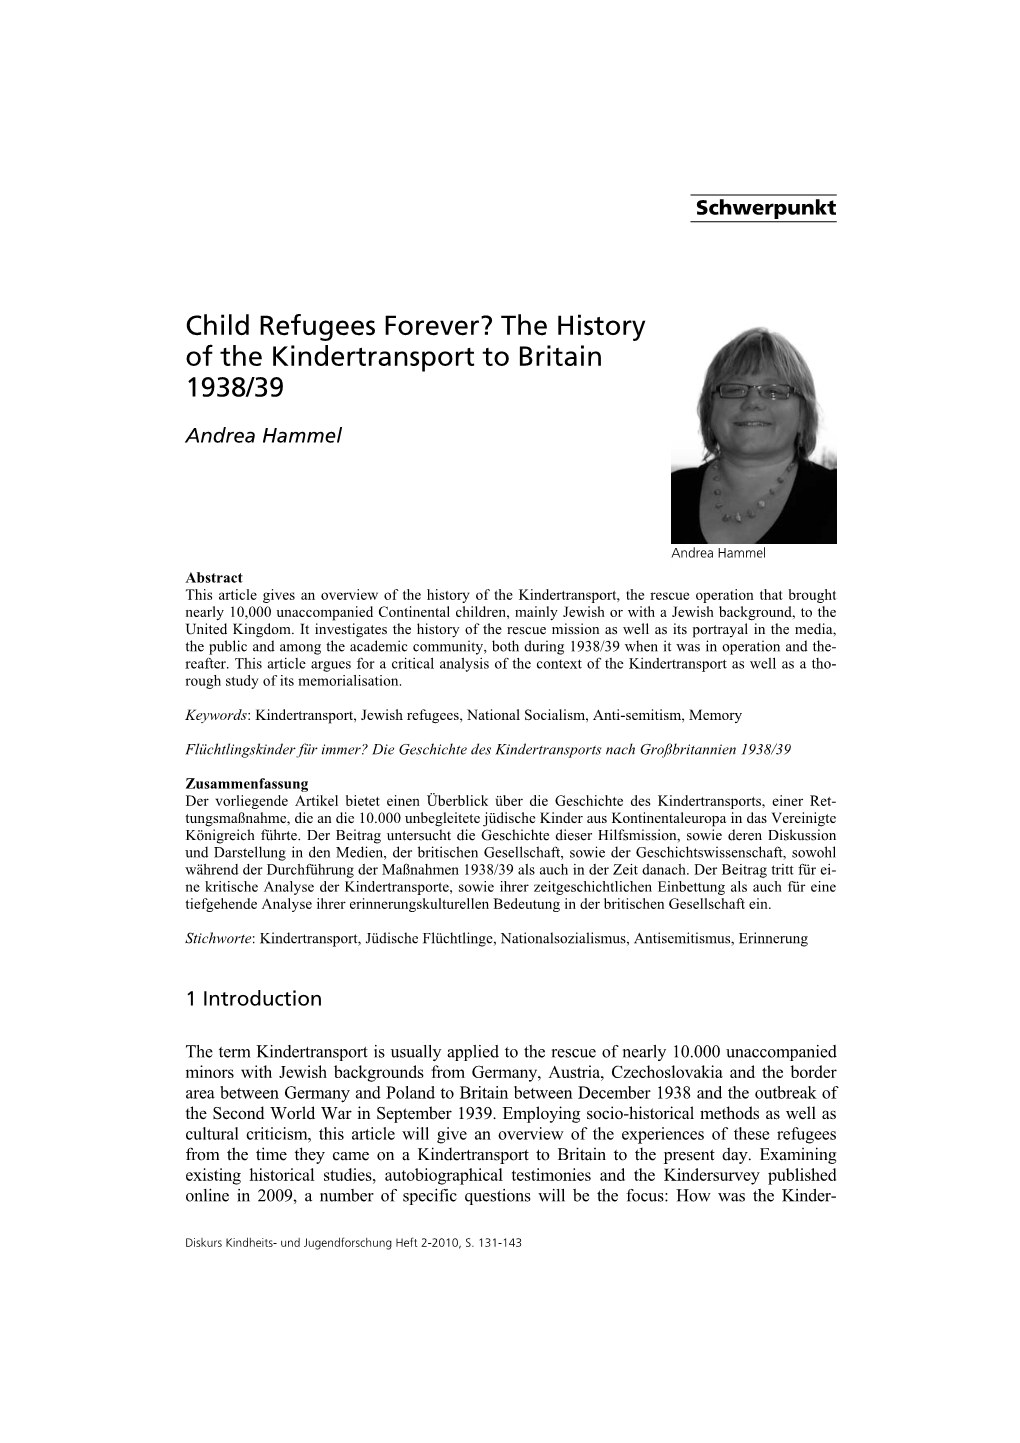 Child Refugees Forever? the History of the Kindertransport to Britain 1938/39